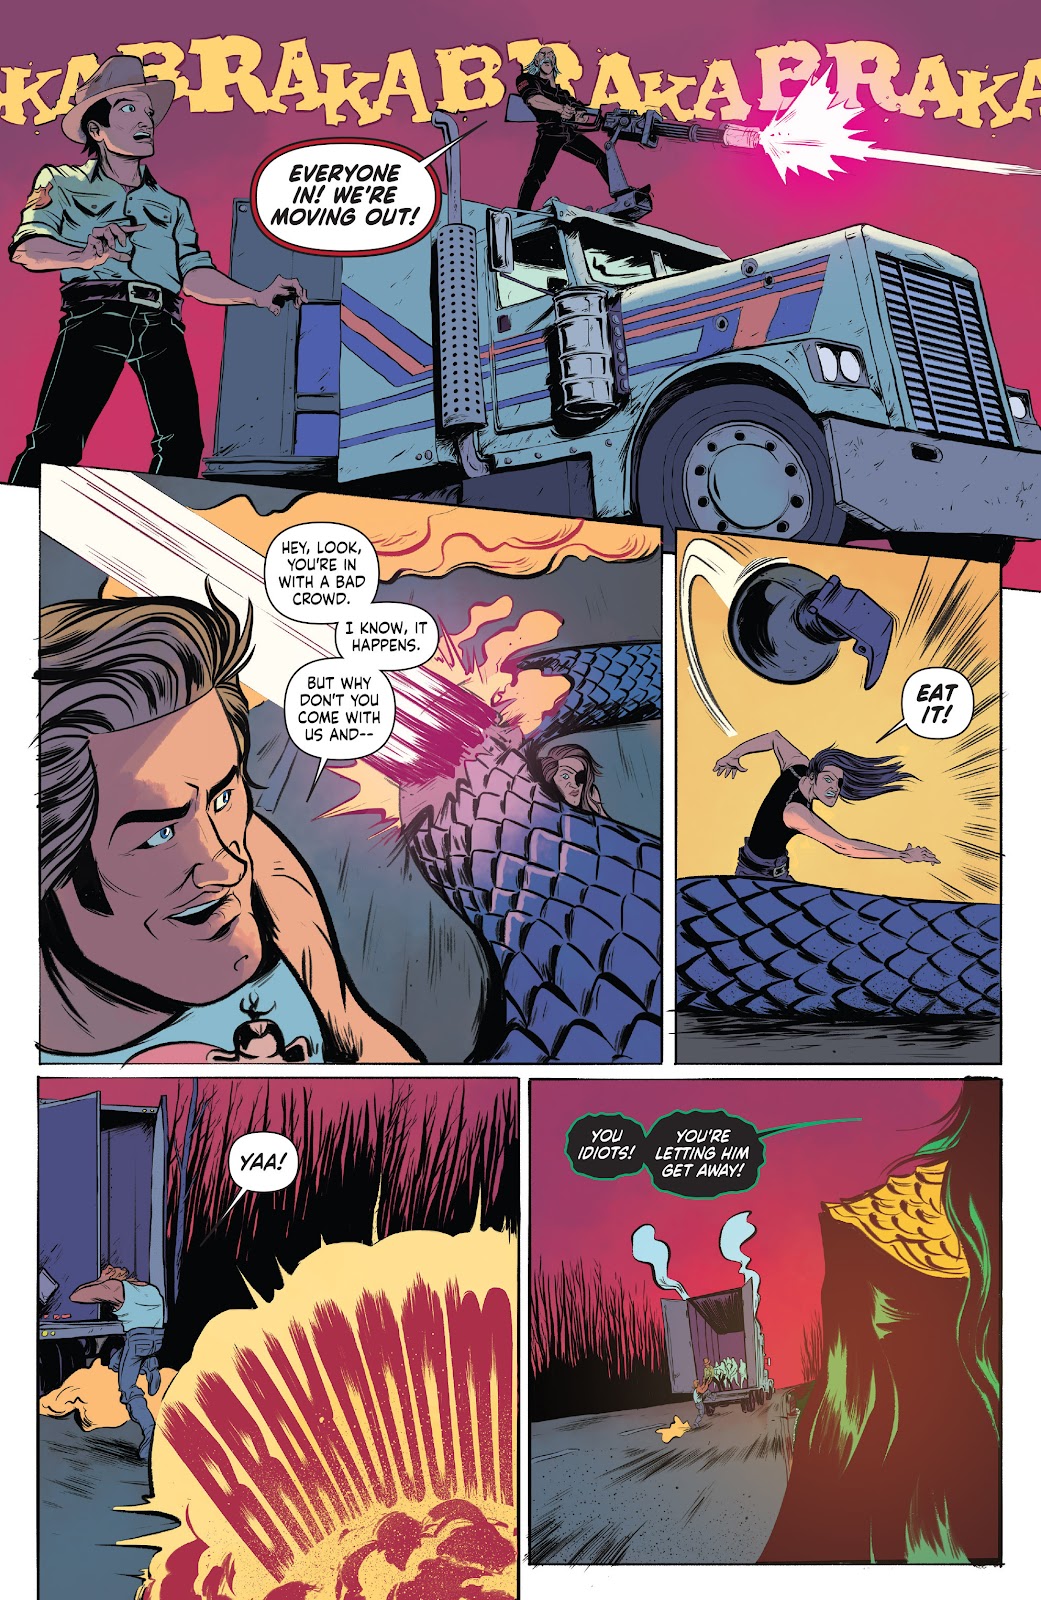 Big Trouble in Little China / Escape from New York issue 3 - Page 11